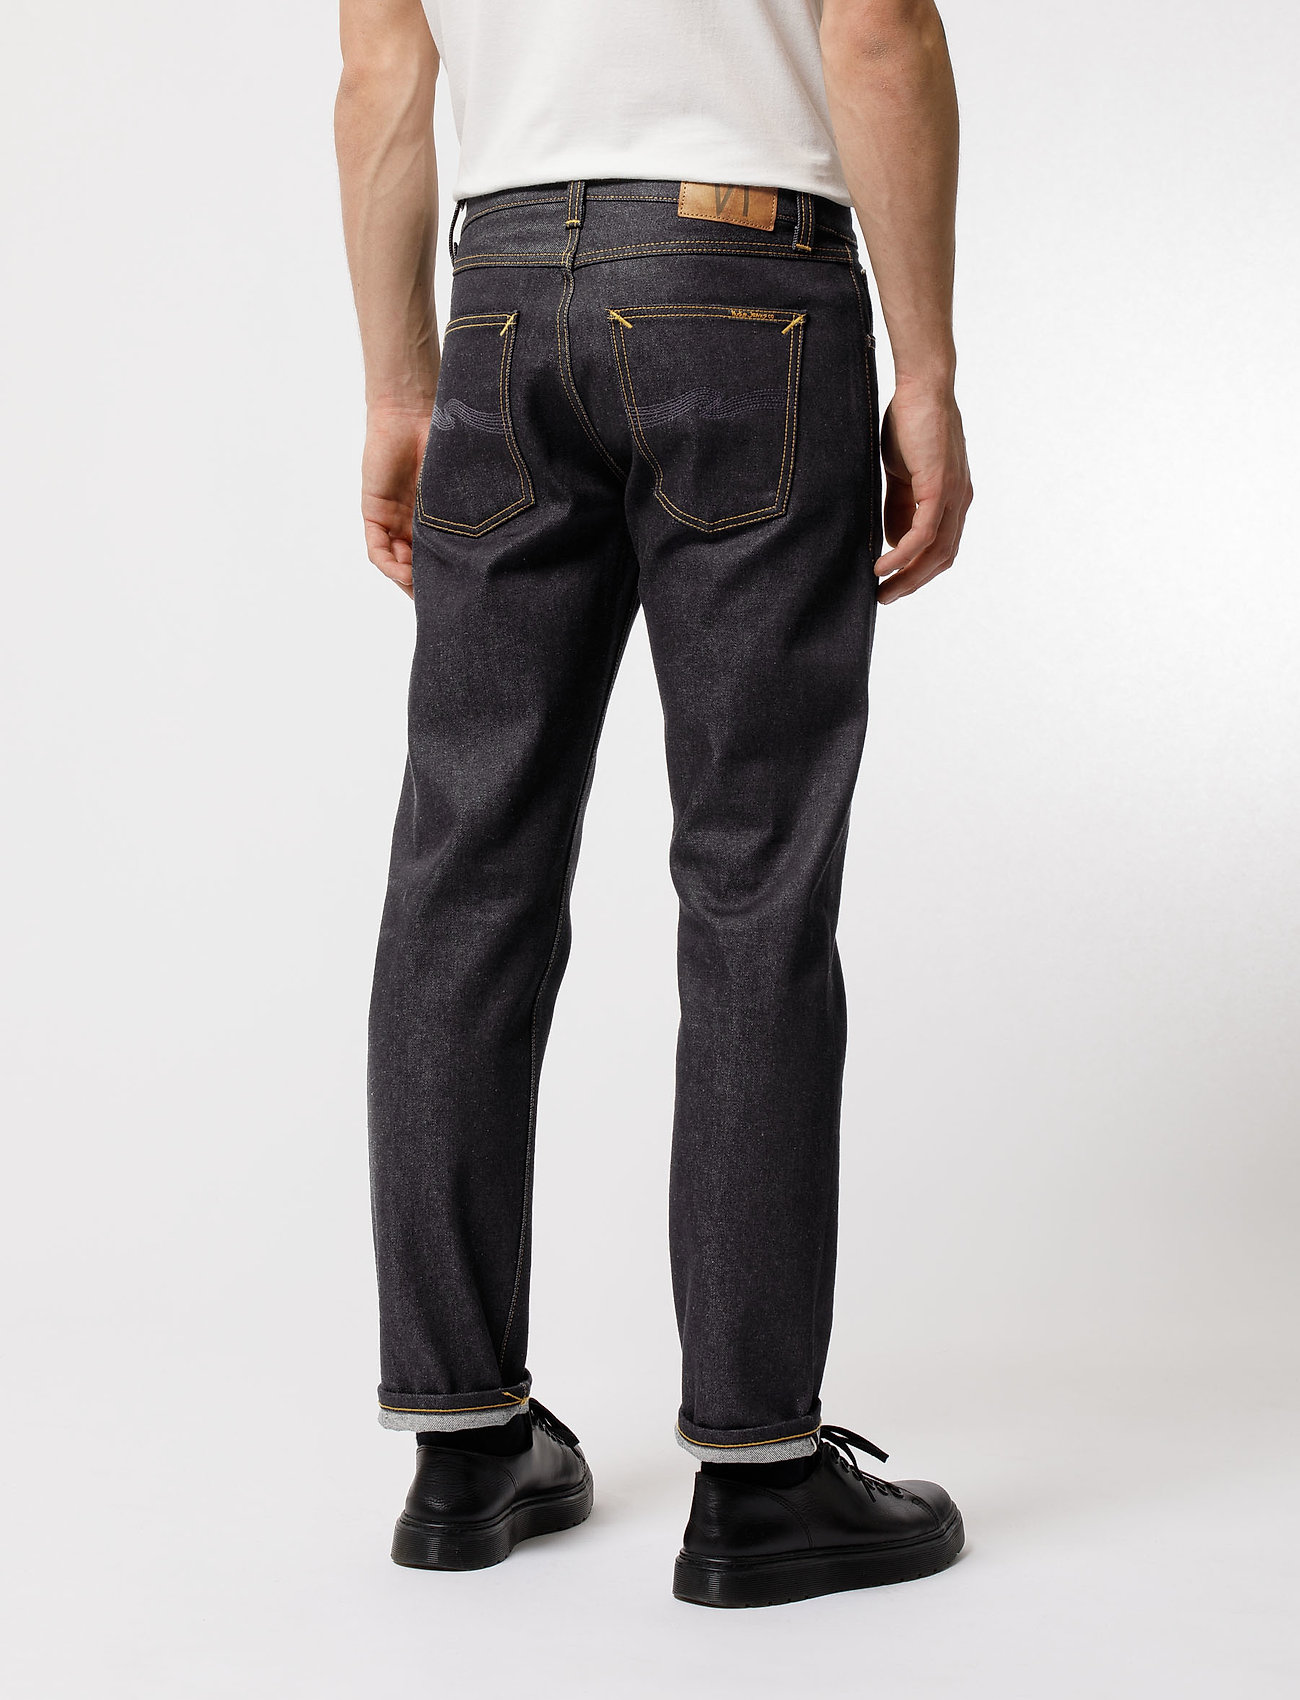 Nudie Jeans - Gritty Jackson - regular jeans - dry maze selvag - 4